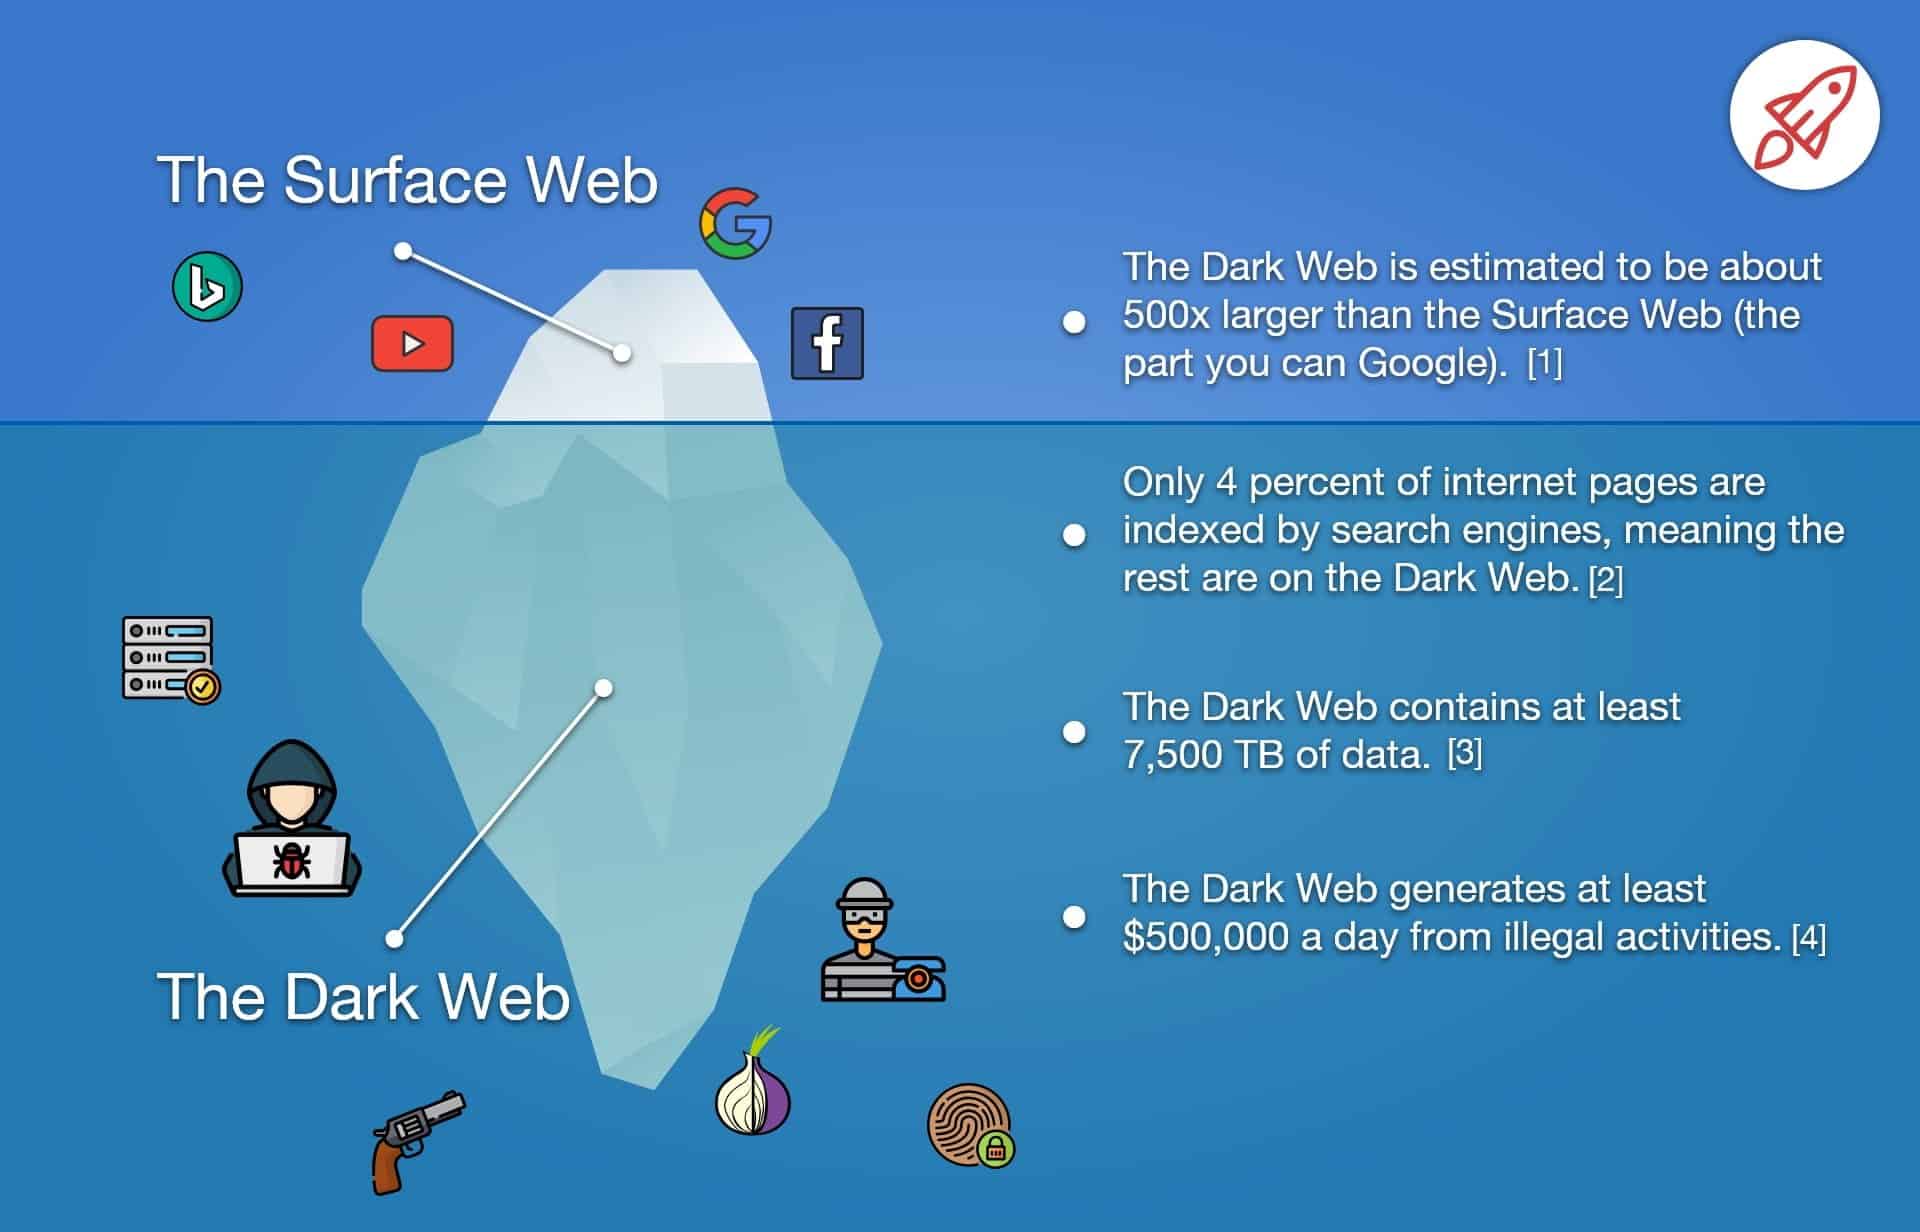 Discover the Secret World of the Dark Web - Get Your Social Security Number Now!